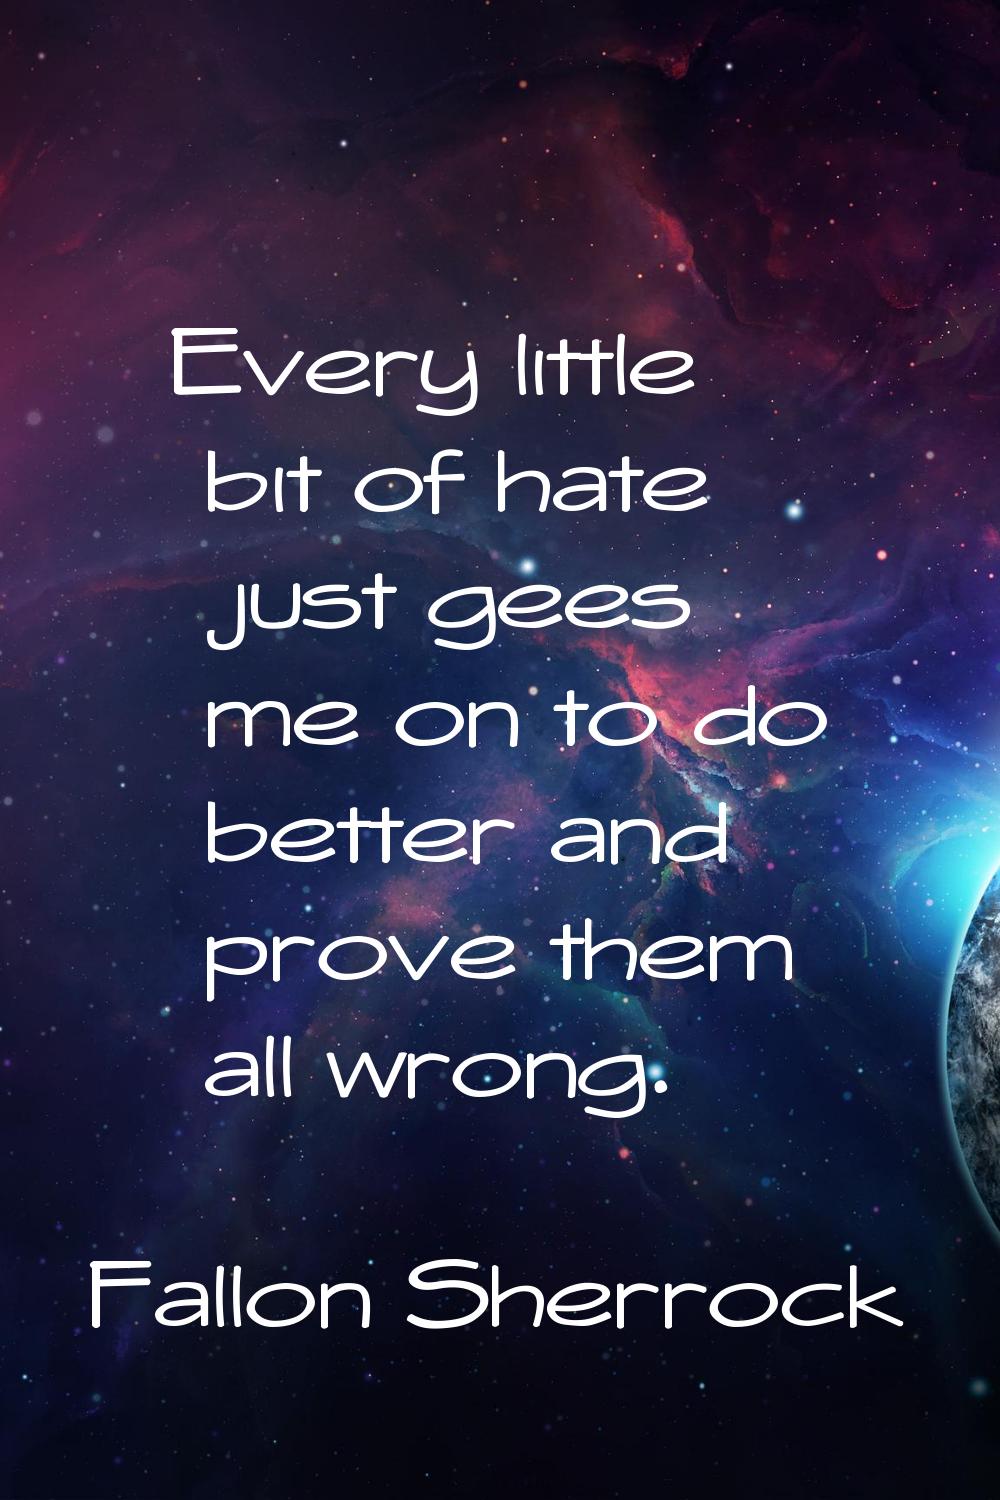 Every little bit of hate just gees me on to do better and prove them all wrong.